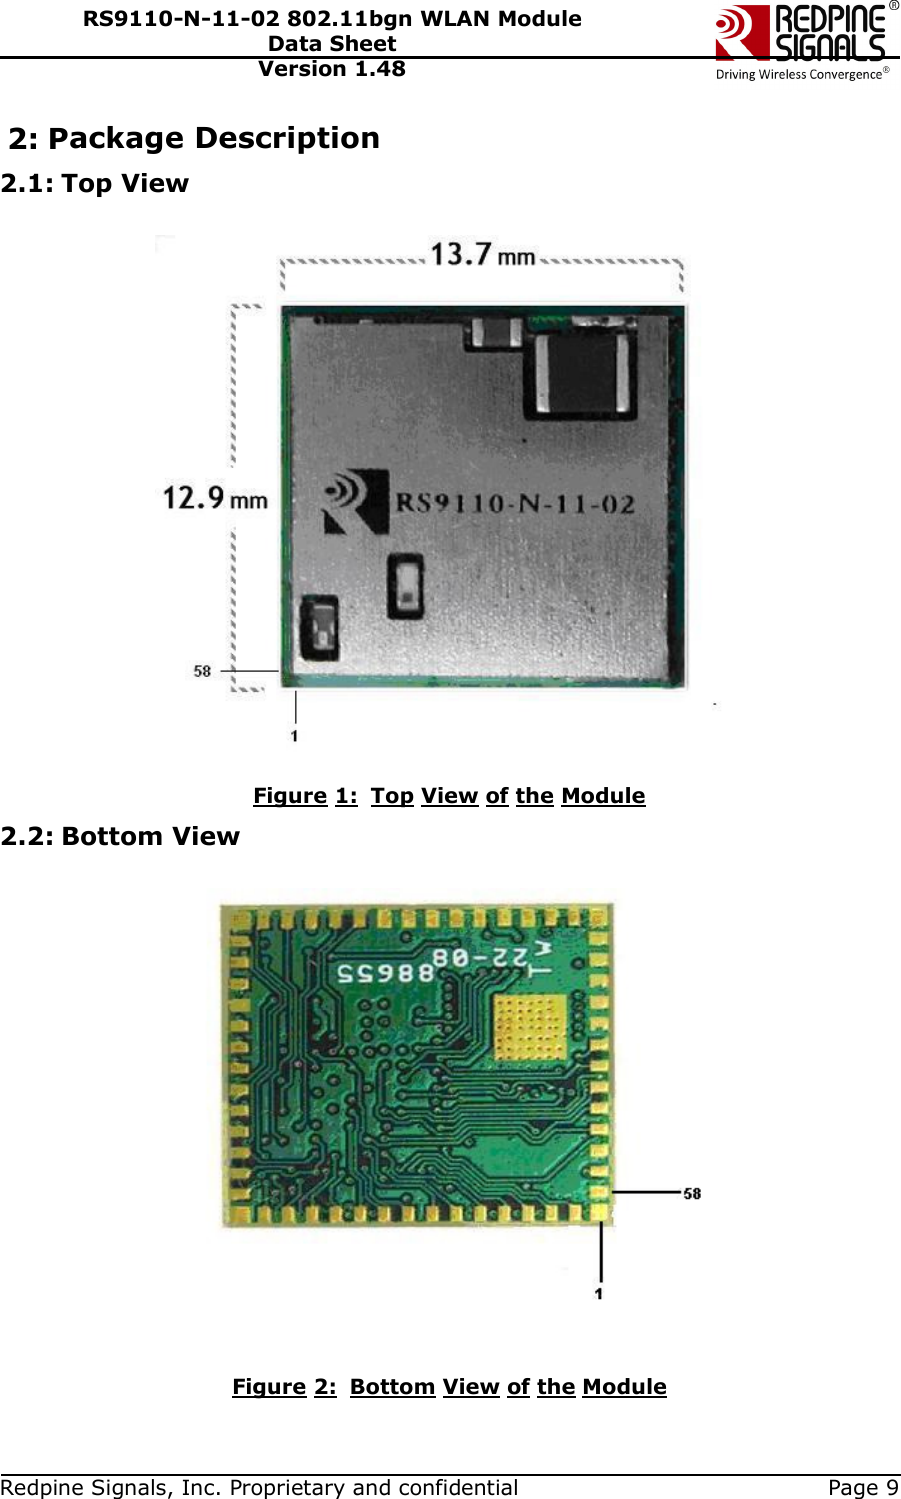   Redpine Signals, Inc. Proprietary and confidential  Page 9 RS9110-N-11-02 802.11bgn WLAN Module Data Sheet Version 1.48 2: Package Description 2.1: Top View                                             Figure 1:  Top View of the Module 2.2: Bottom View    Figure 2:  Bottom View of the Module 